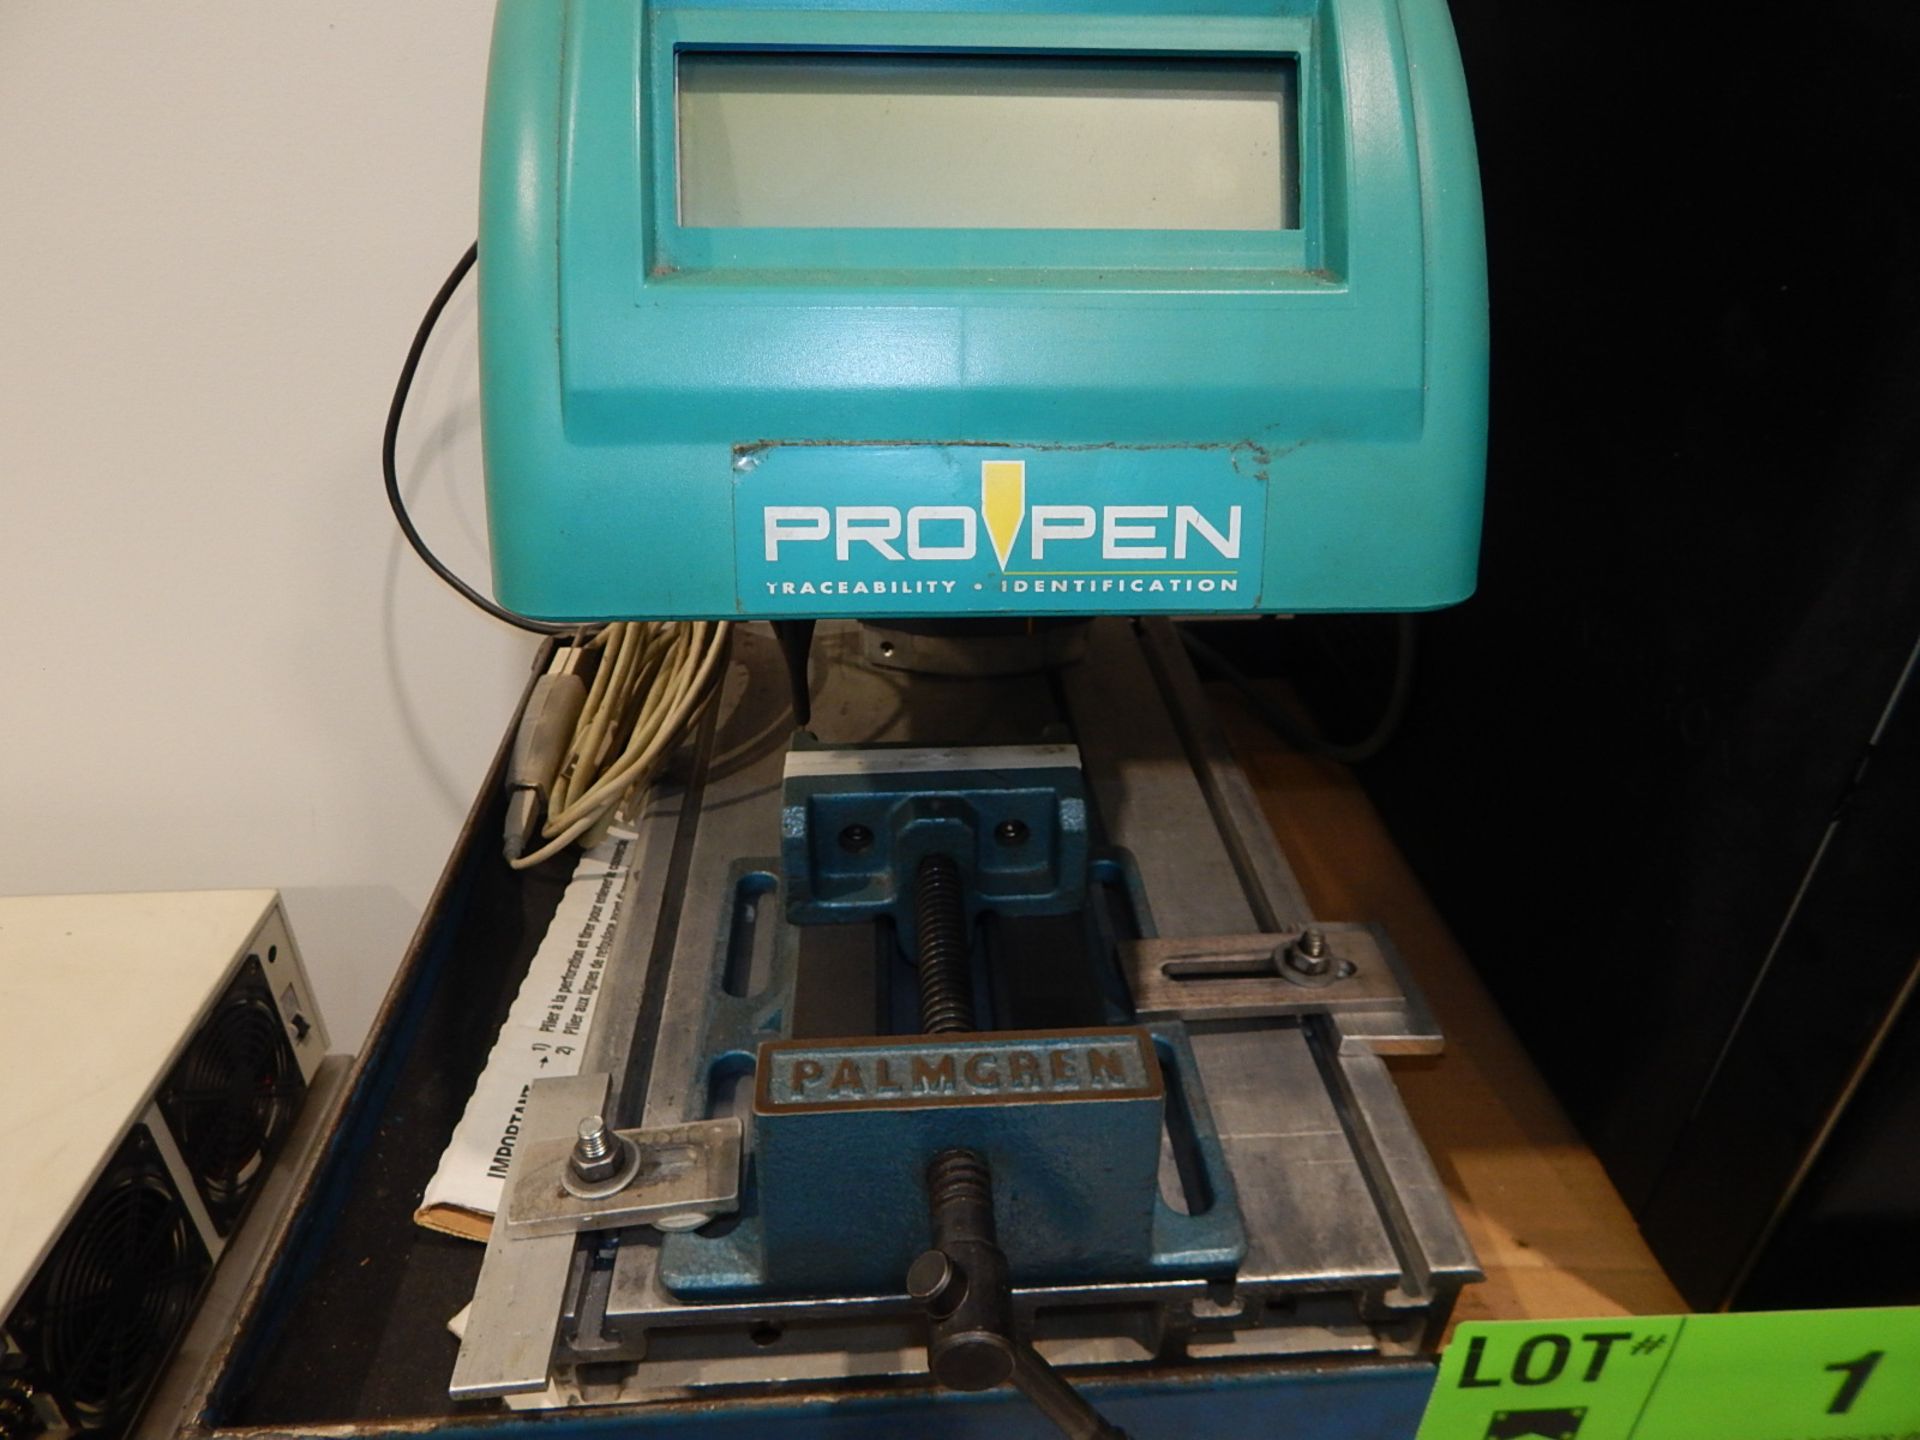 PROPEN P-3000 CNC DOT PEEN PARTS MARKER WITH WINDOWS PC BASED CONTROL, S/N 01-05-02518 - Image 3 of 5